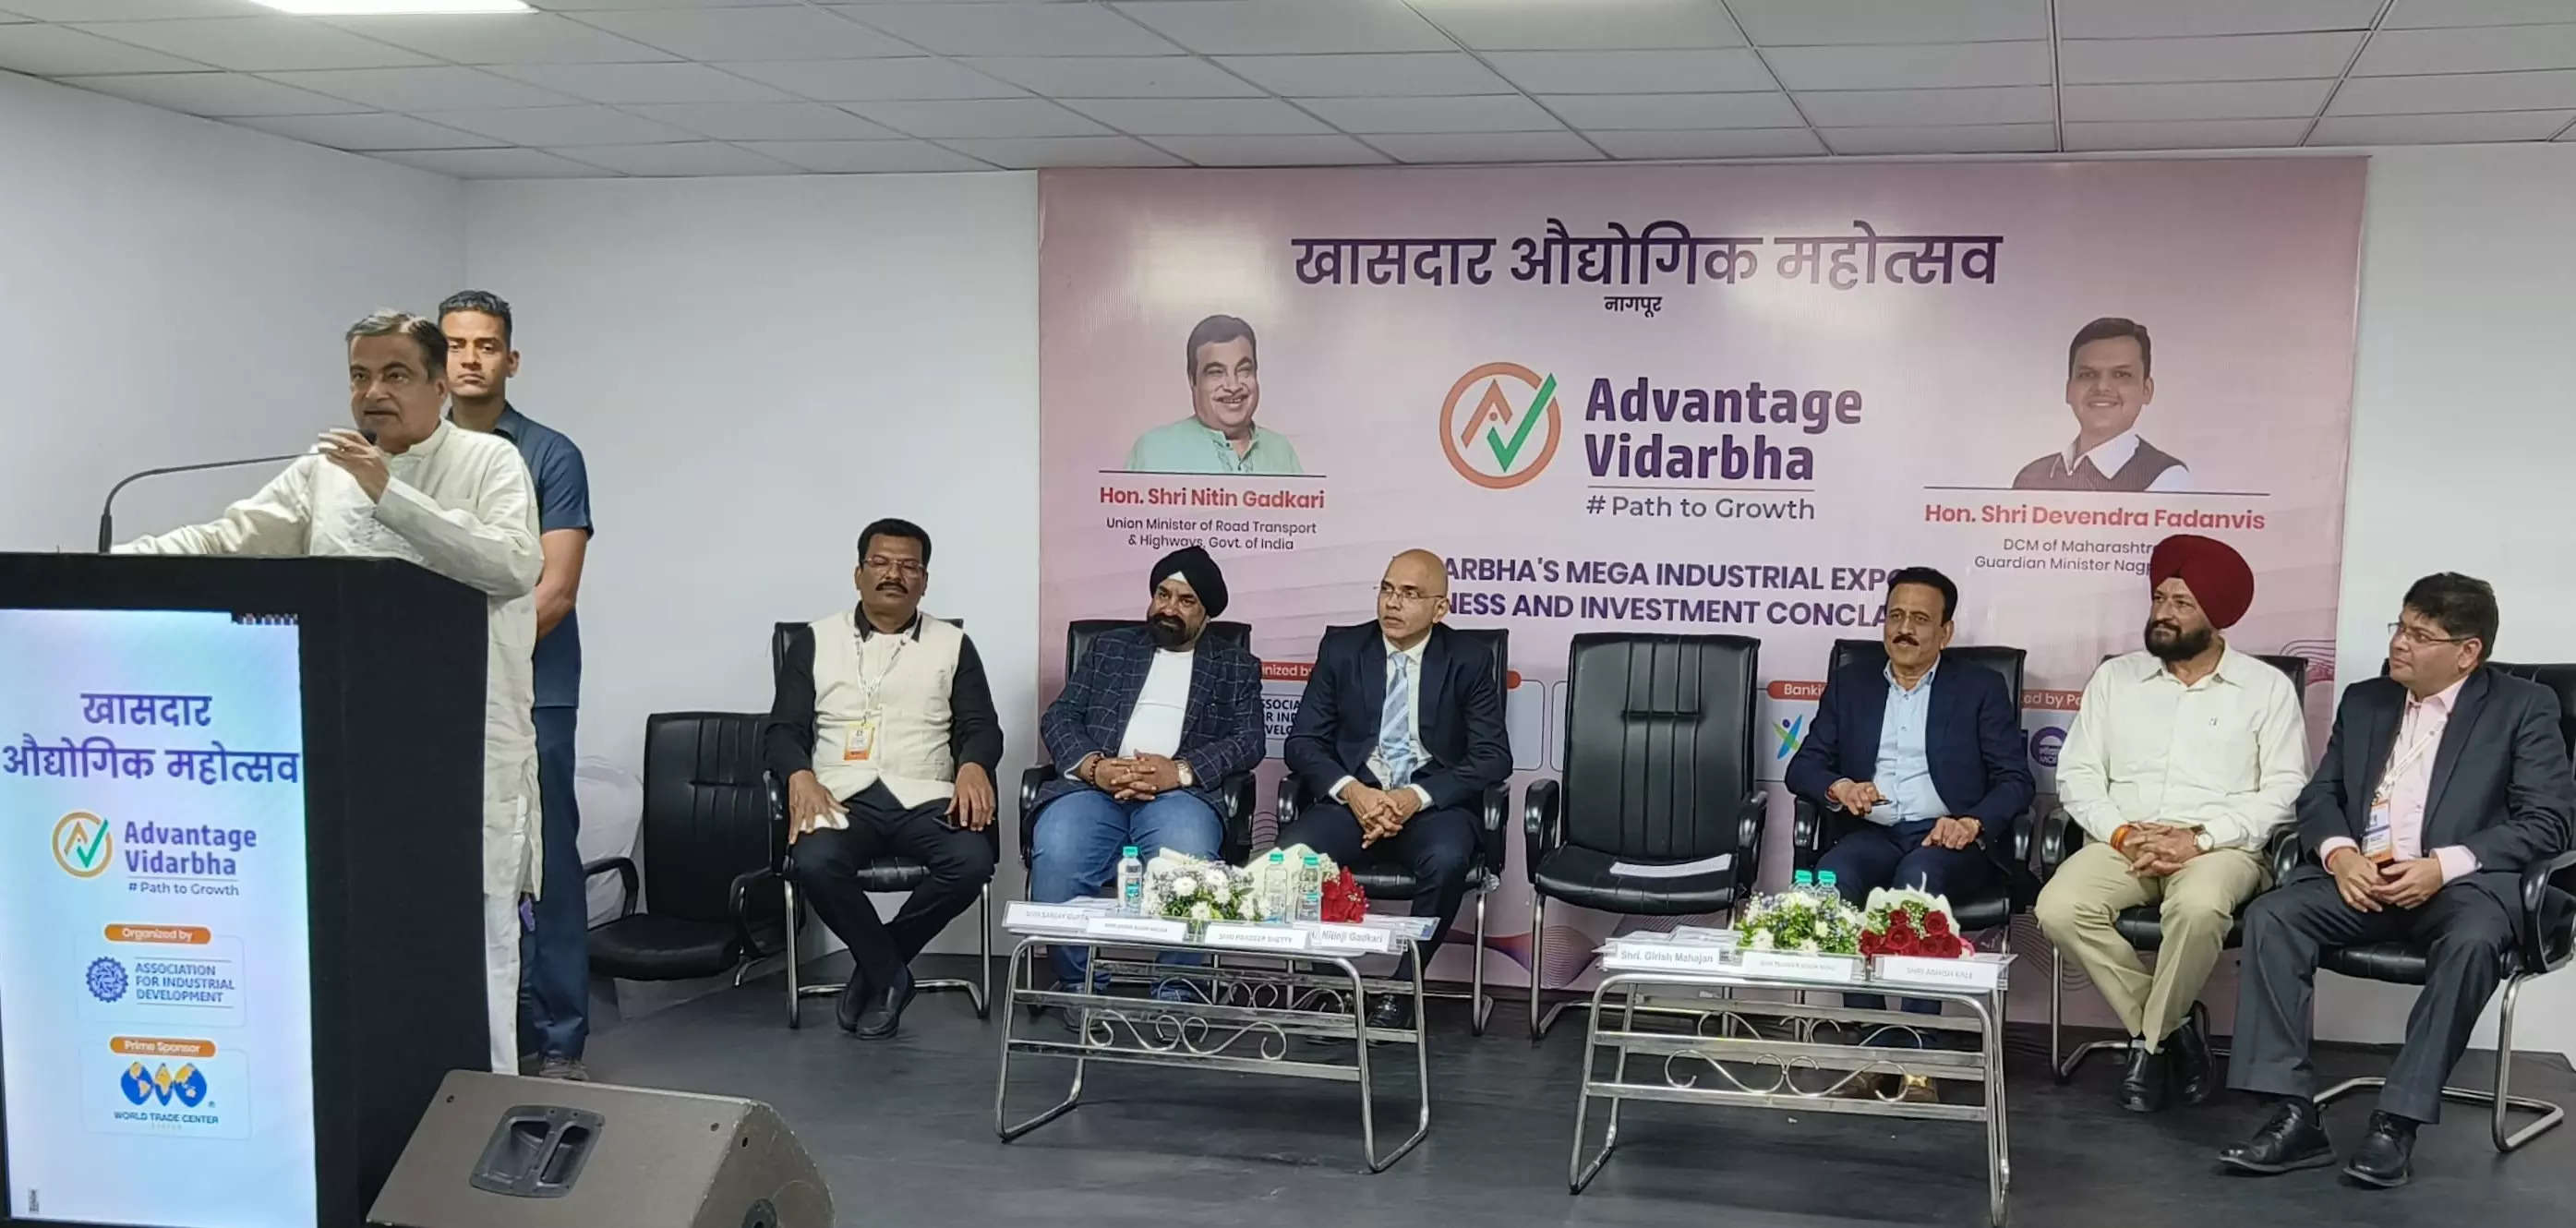 <p>Nitin Gadkari shares insights on challenges faced by the hospitality and tourism sector in Vidarbha at Advantage Vidarbha.</p>